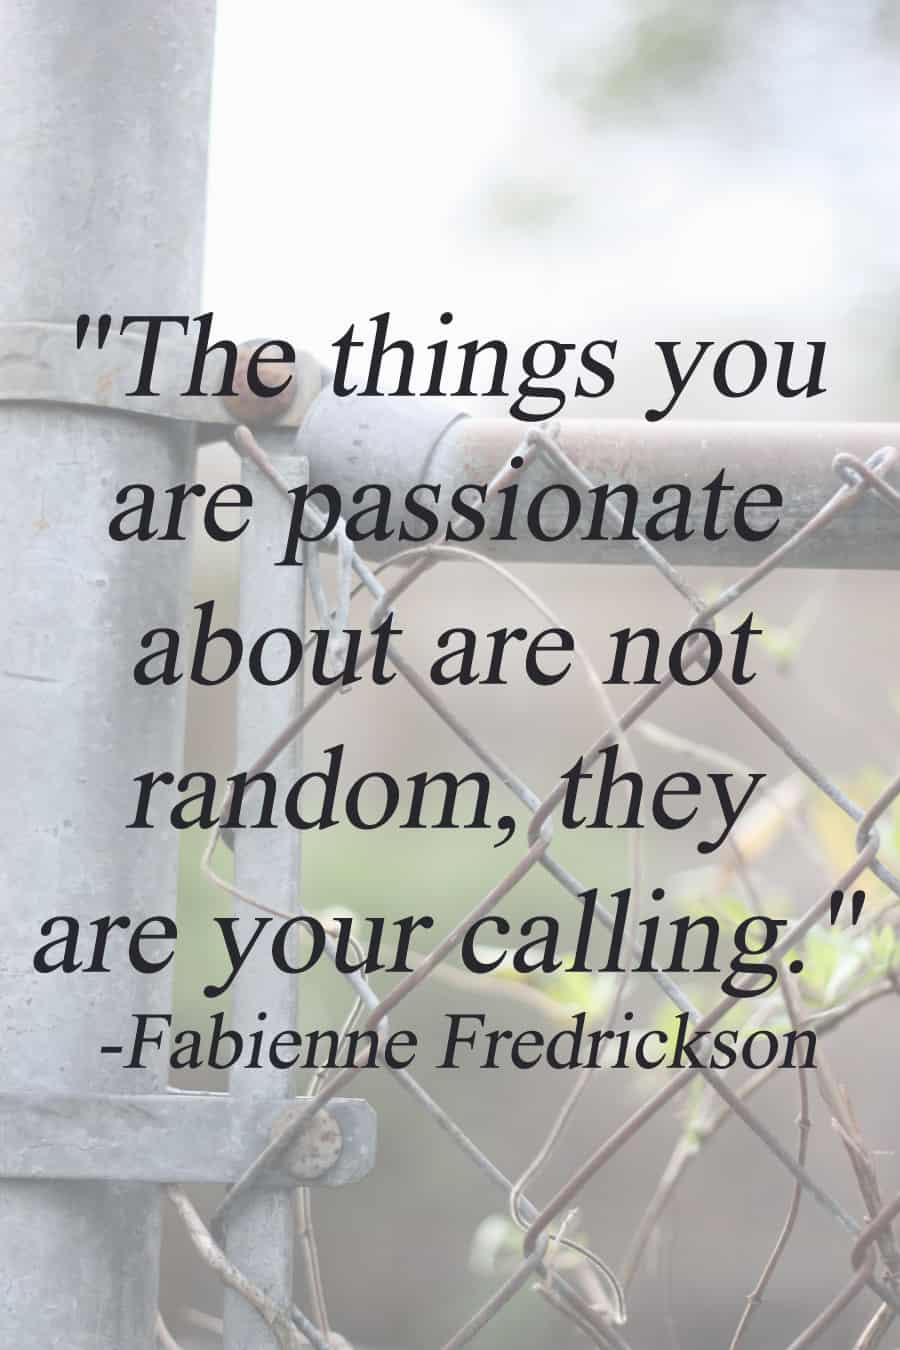 "The things you are passionate about are not random, they are your calling." - Fabienne Fredrickson | via Autumn All Along 